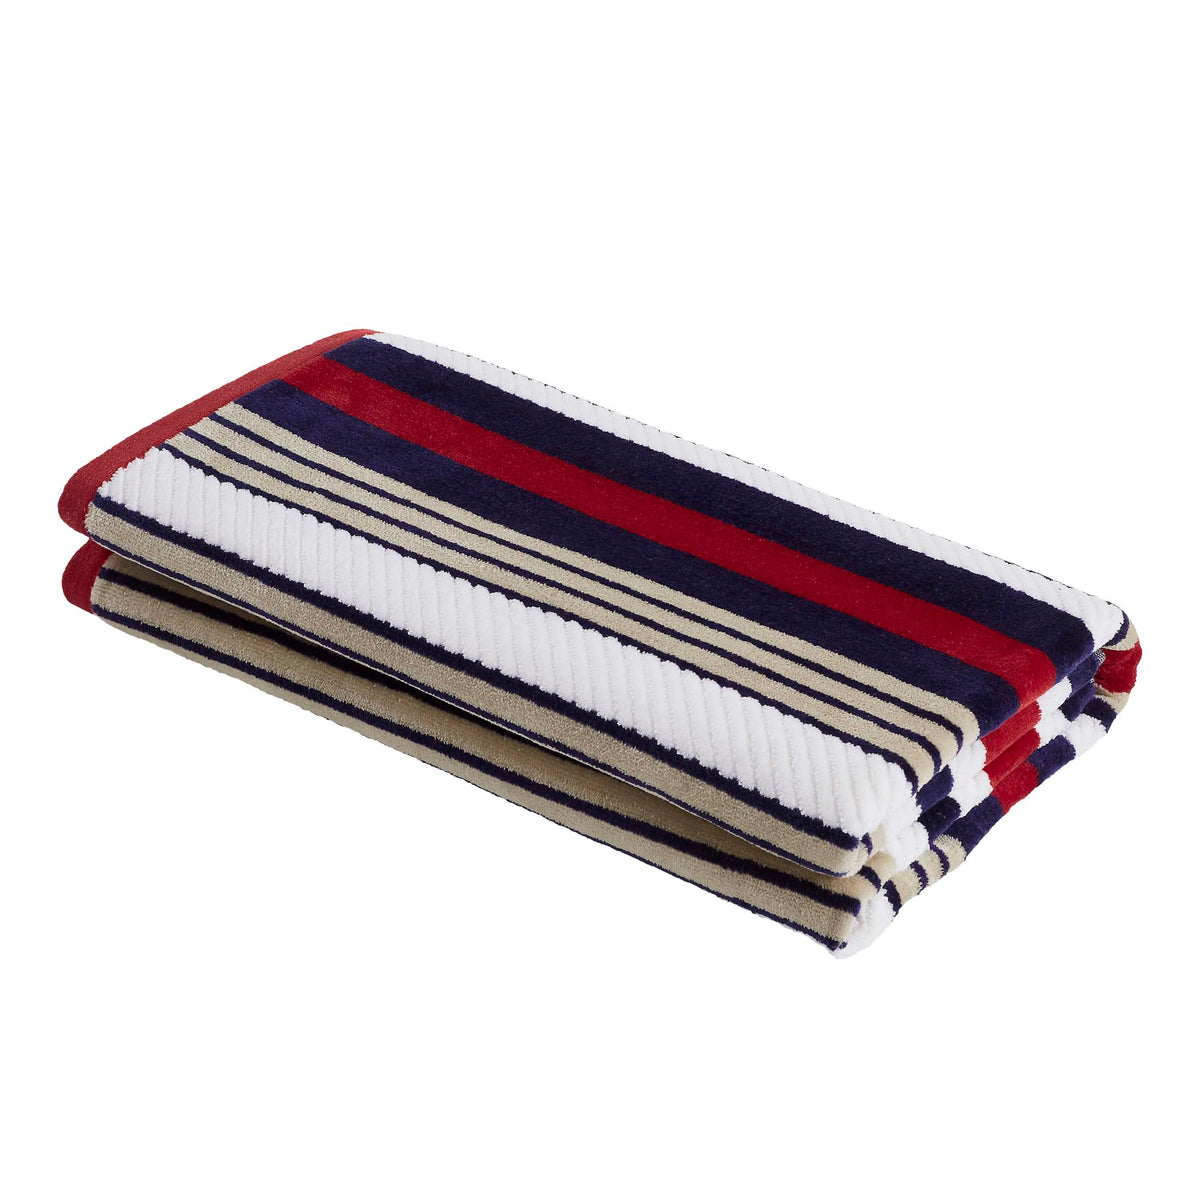 2 Piece Rope Textured Striped Oversized Cotton Beach Towel Set - Red